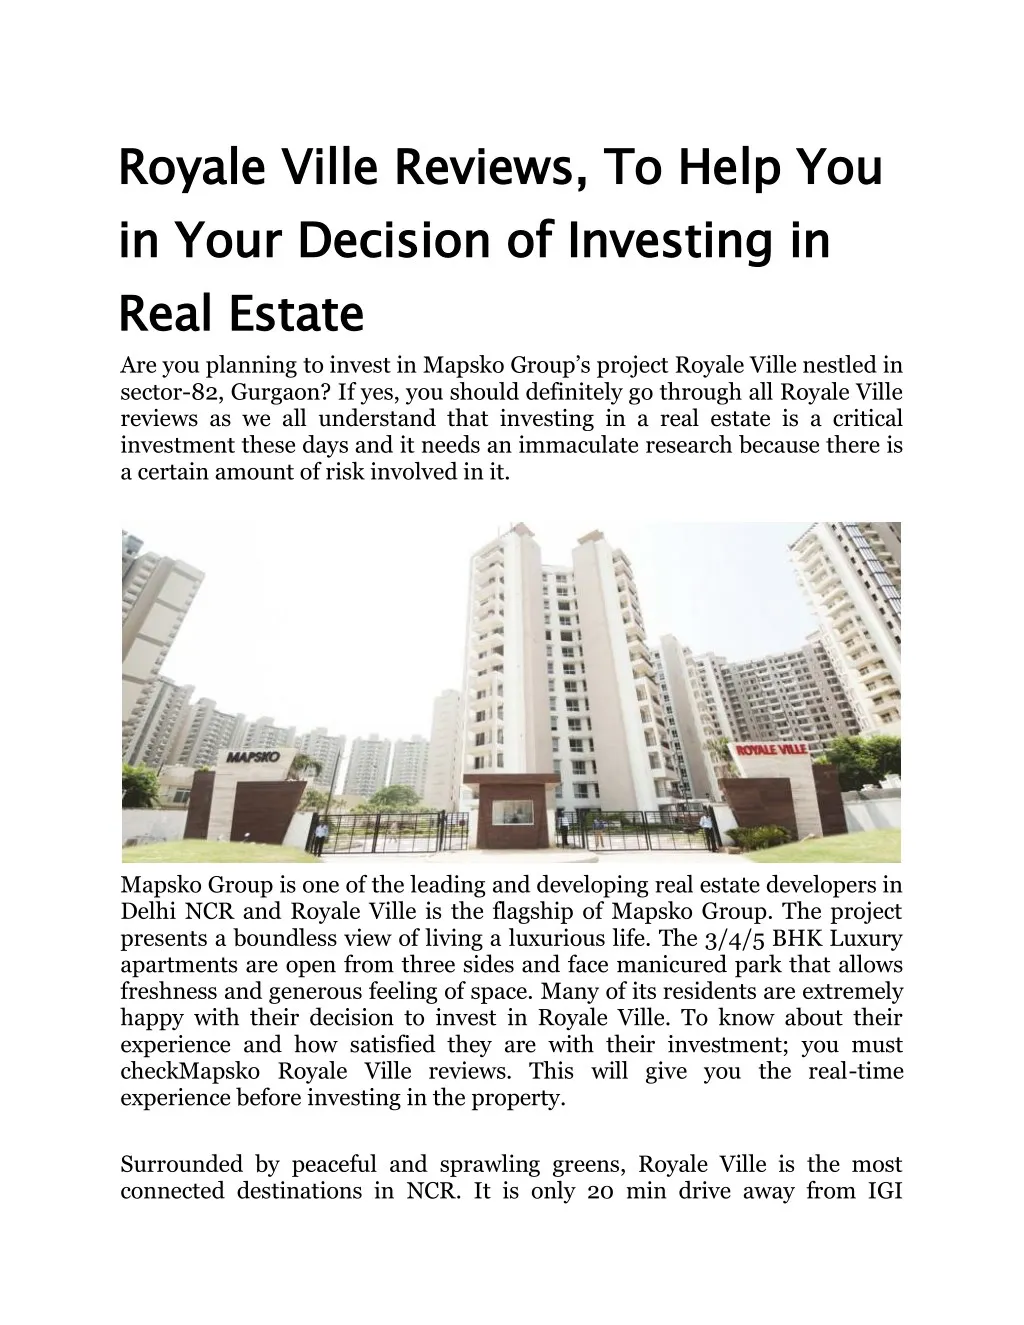 royale ville reviews to help you in your decision